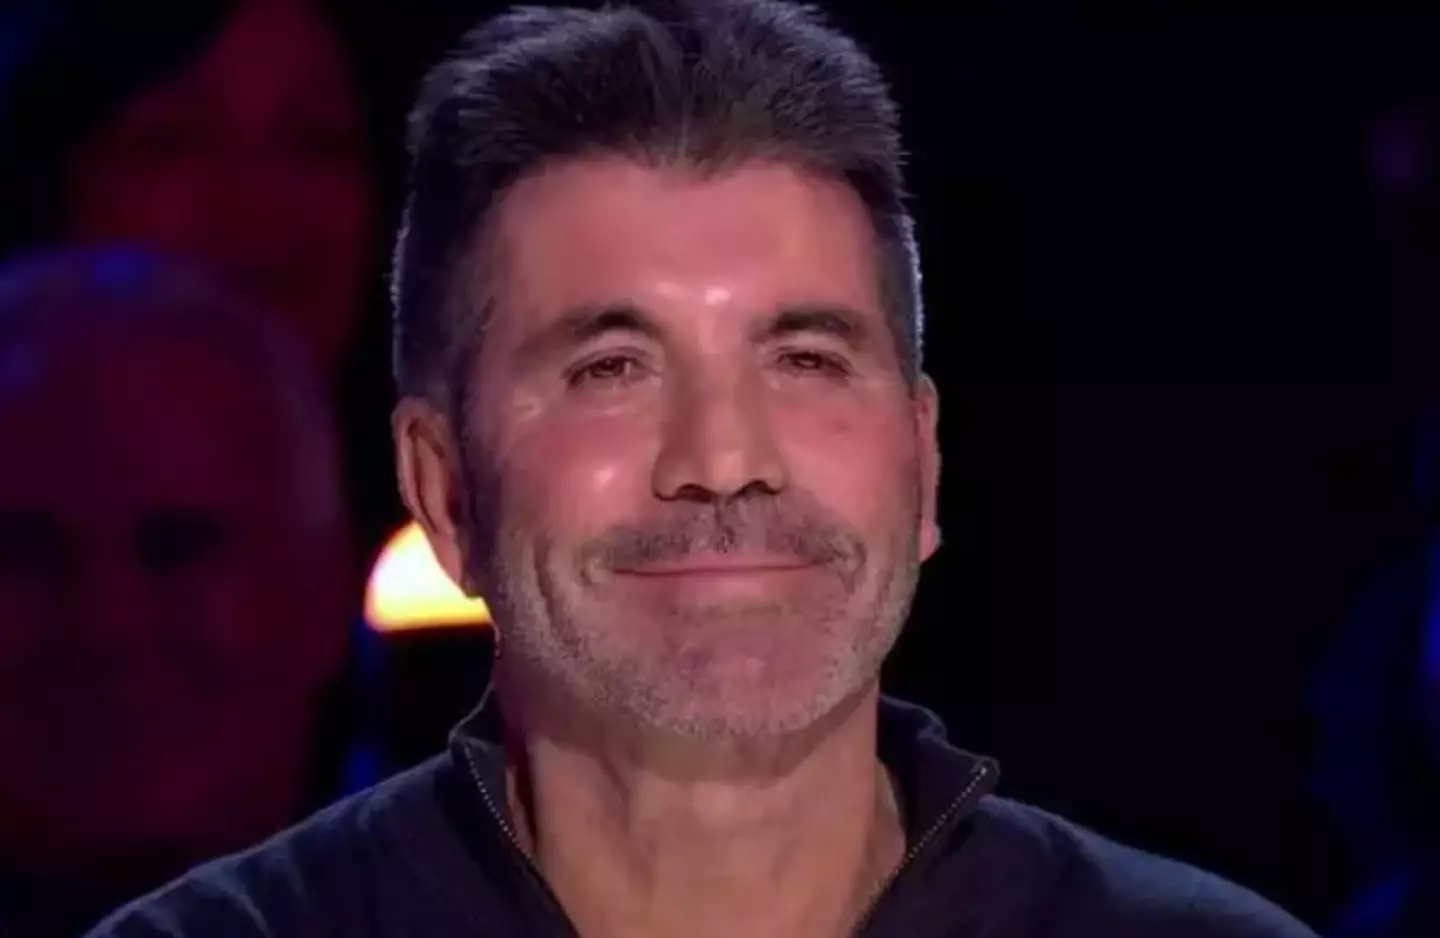 Simon Cowell says there's 'zero' filler in his face.